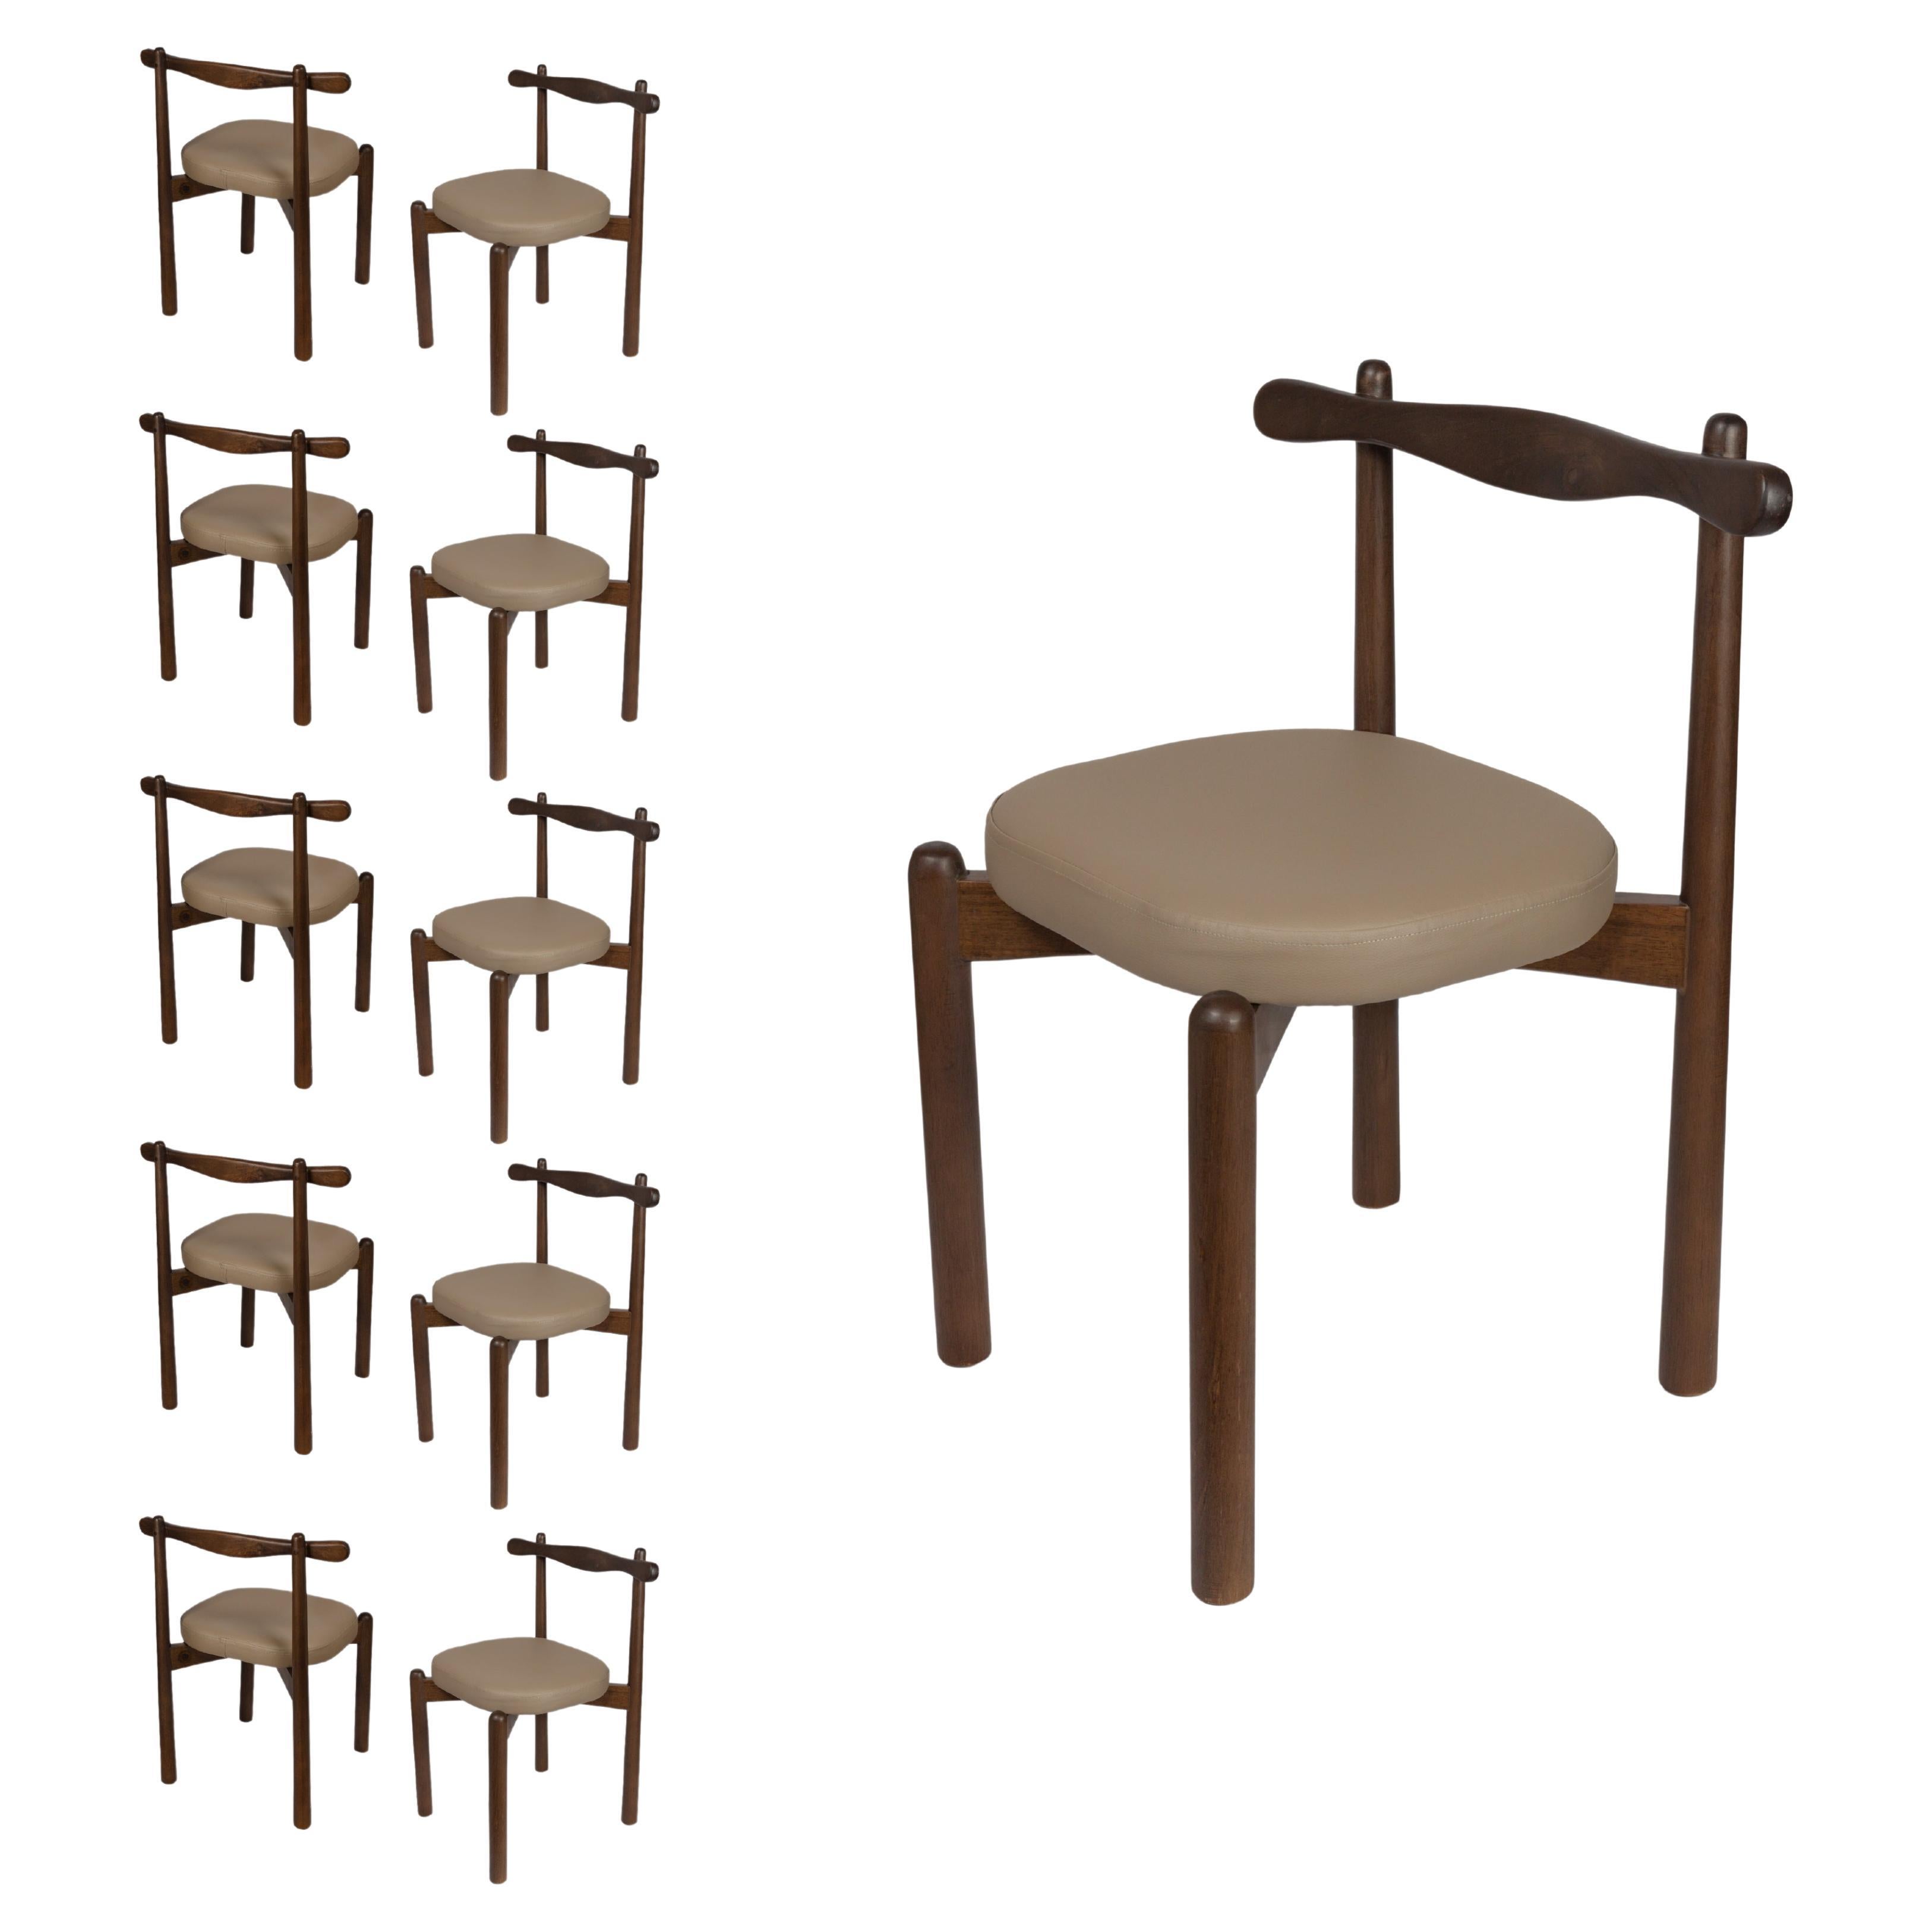 Set of 10 Dining Chairs Uçá Dark Brown Wood (fabric ref : F04) For Sale